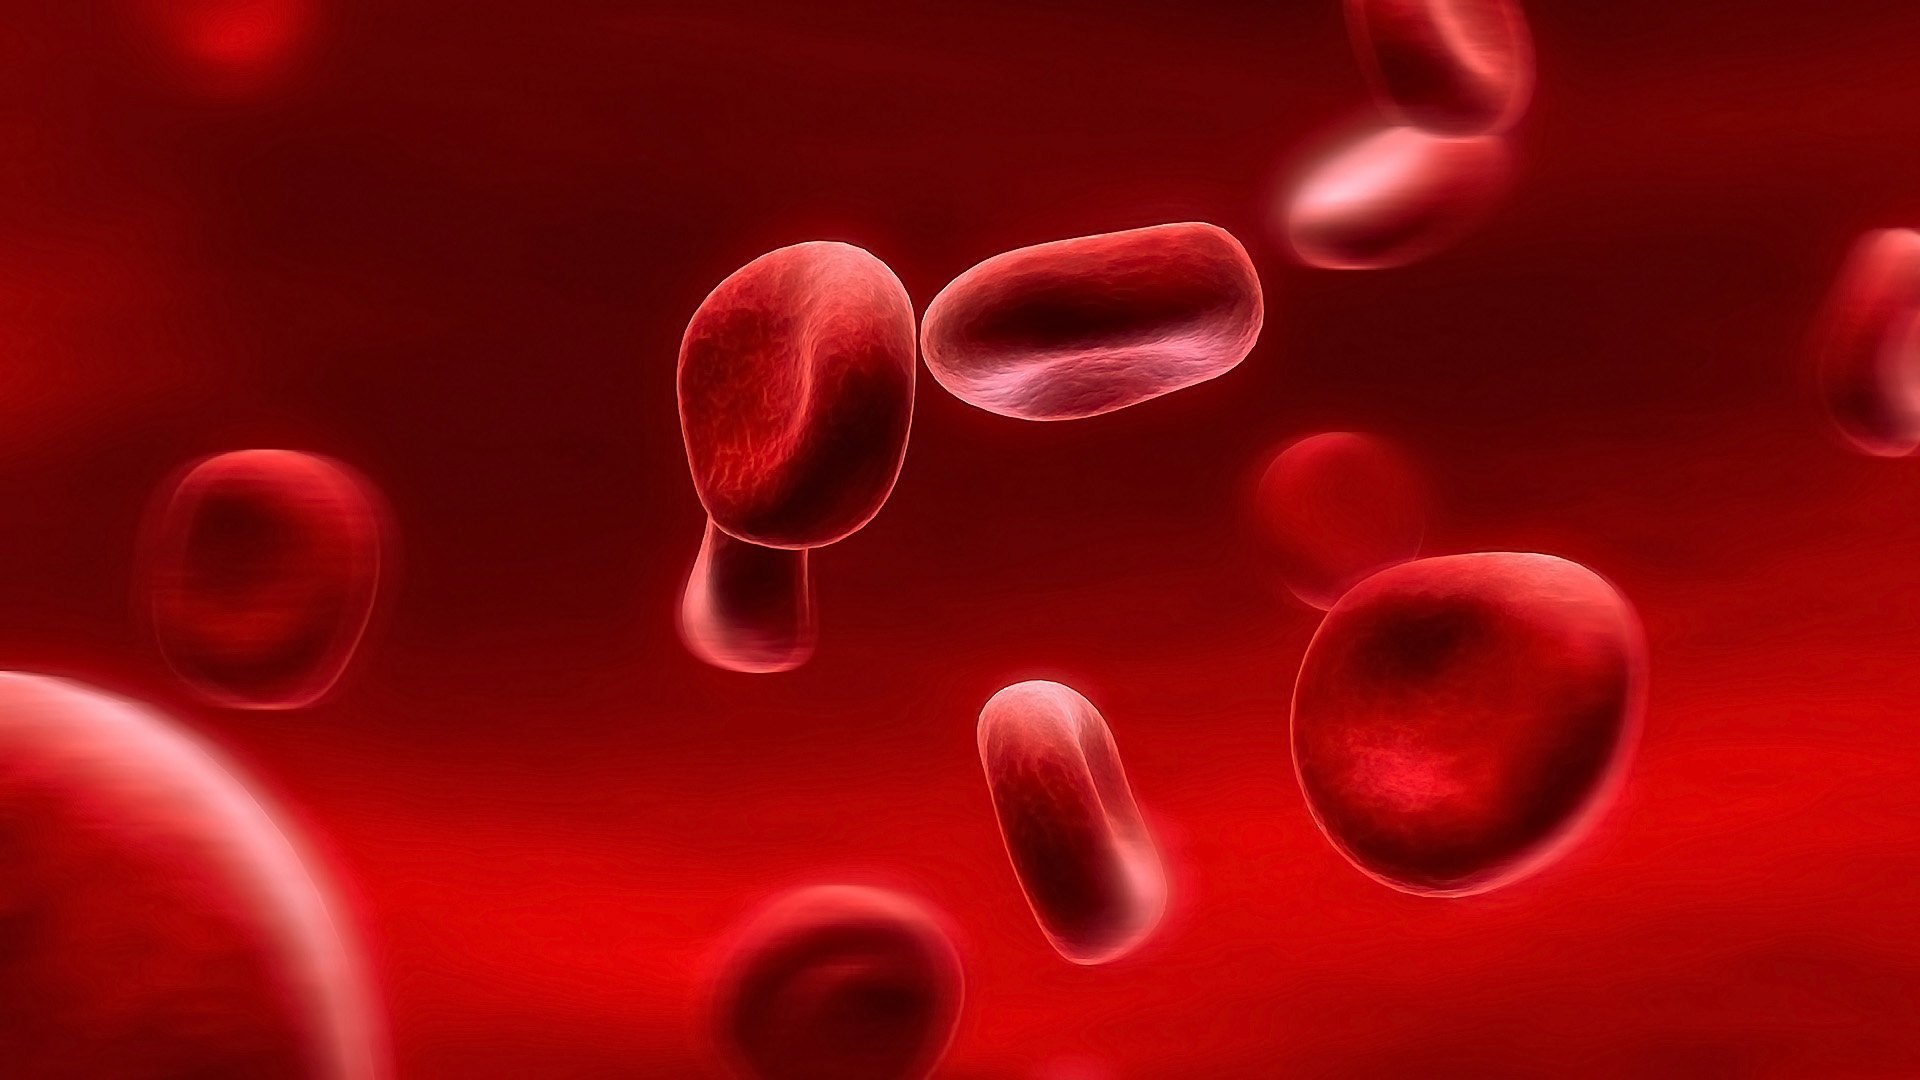 Wallpaper Red Blood Cells Full HD 2k Picture Image